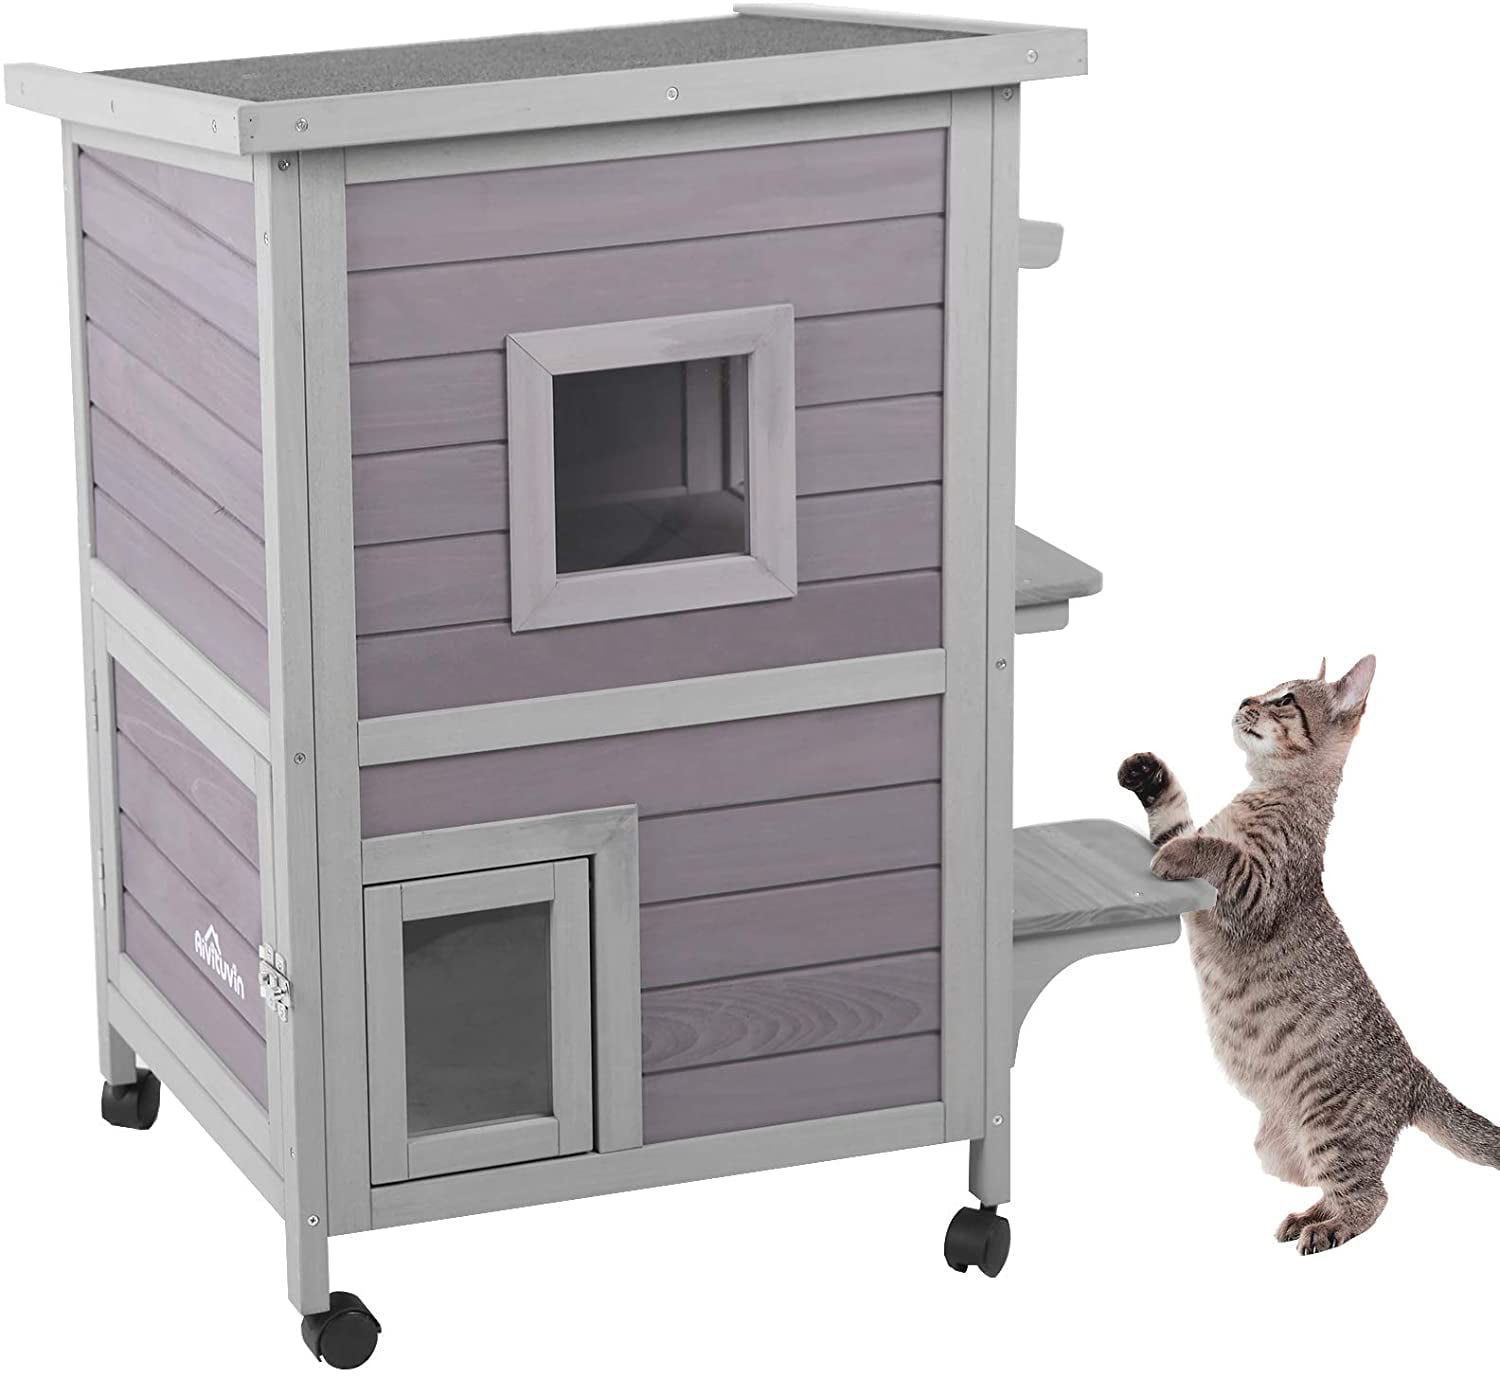 Petsfit 2-Story Weatherproof Outdoor Kitty Cat House/Condo/Shelter With Escape D 